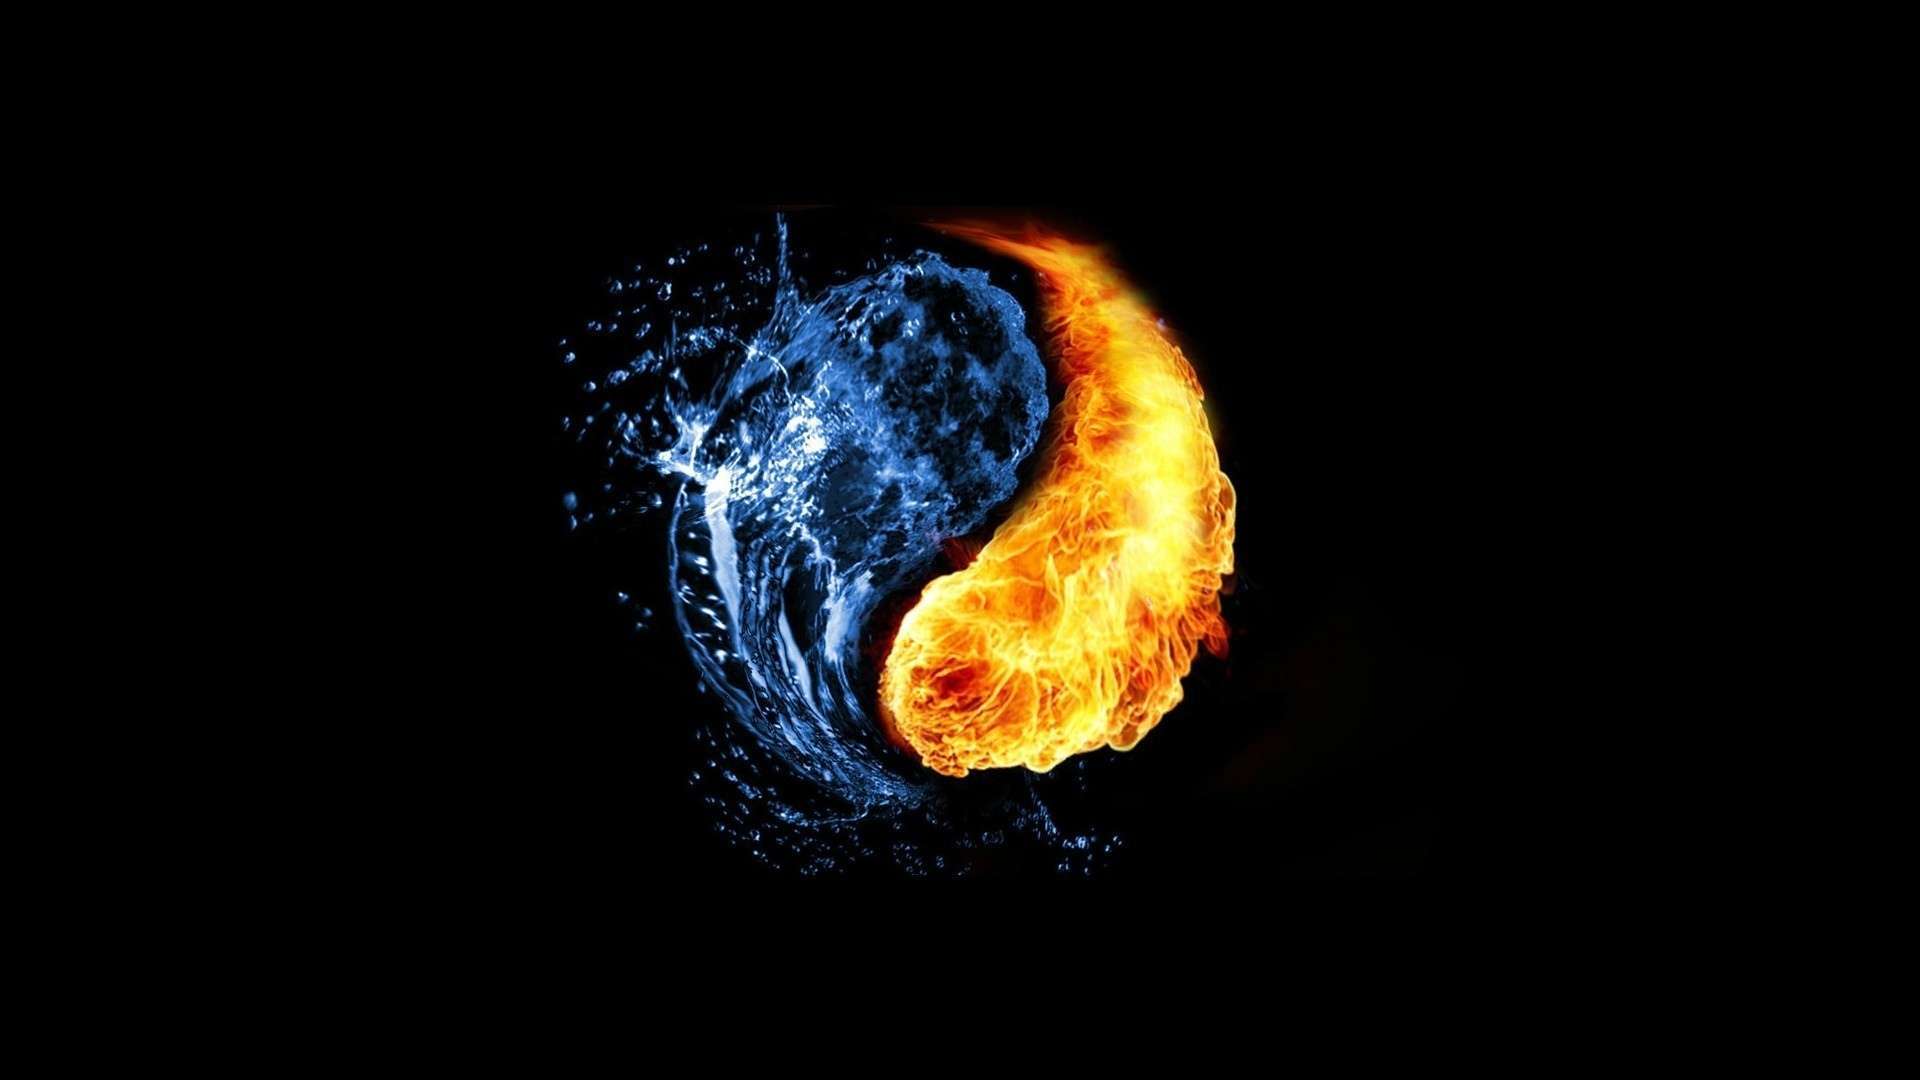 fire and ice wallpaper abstract